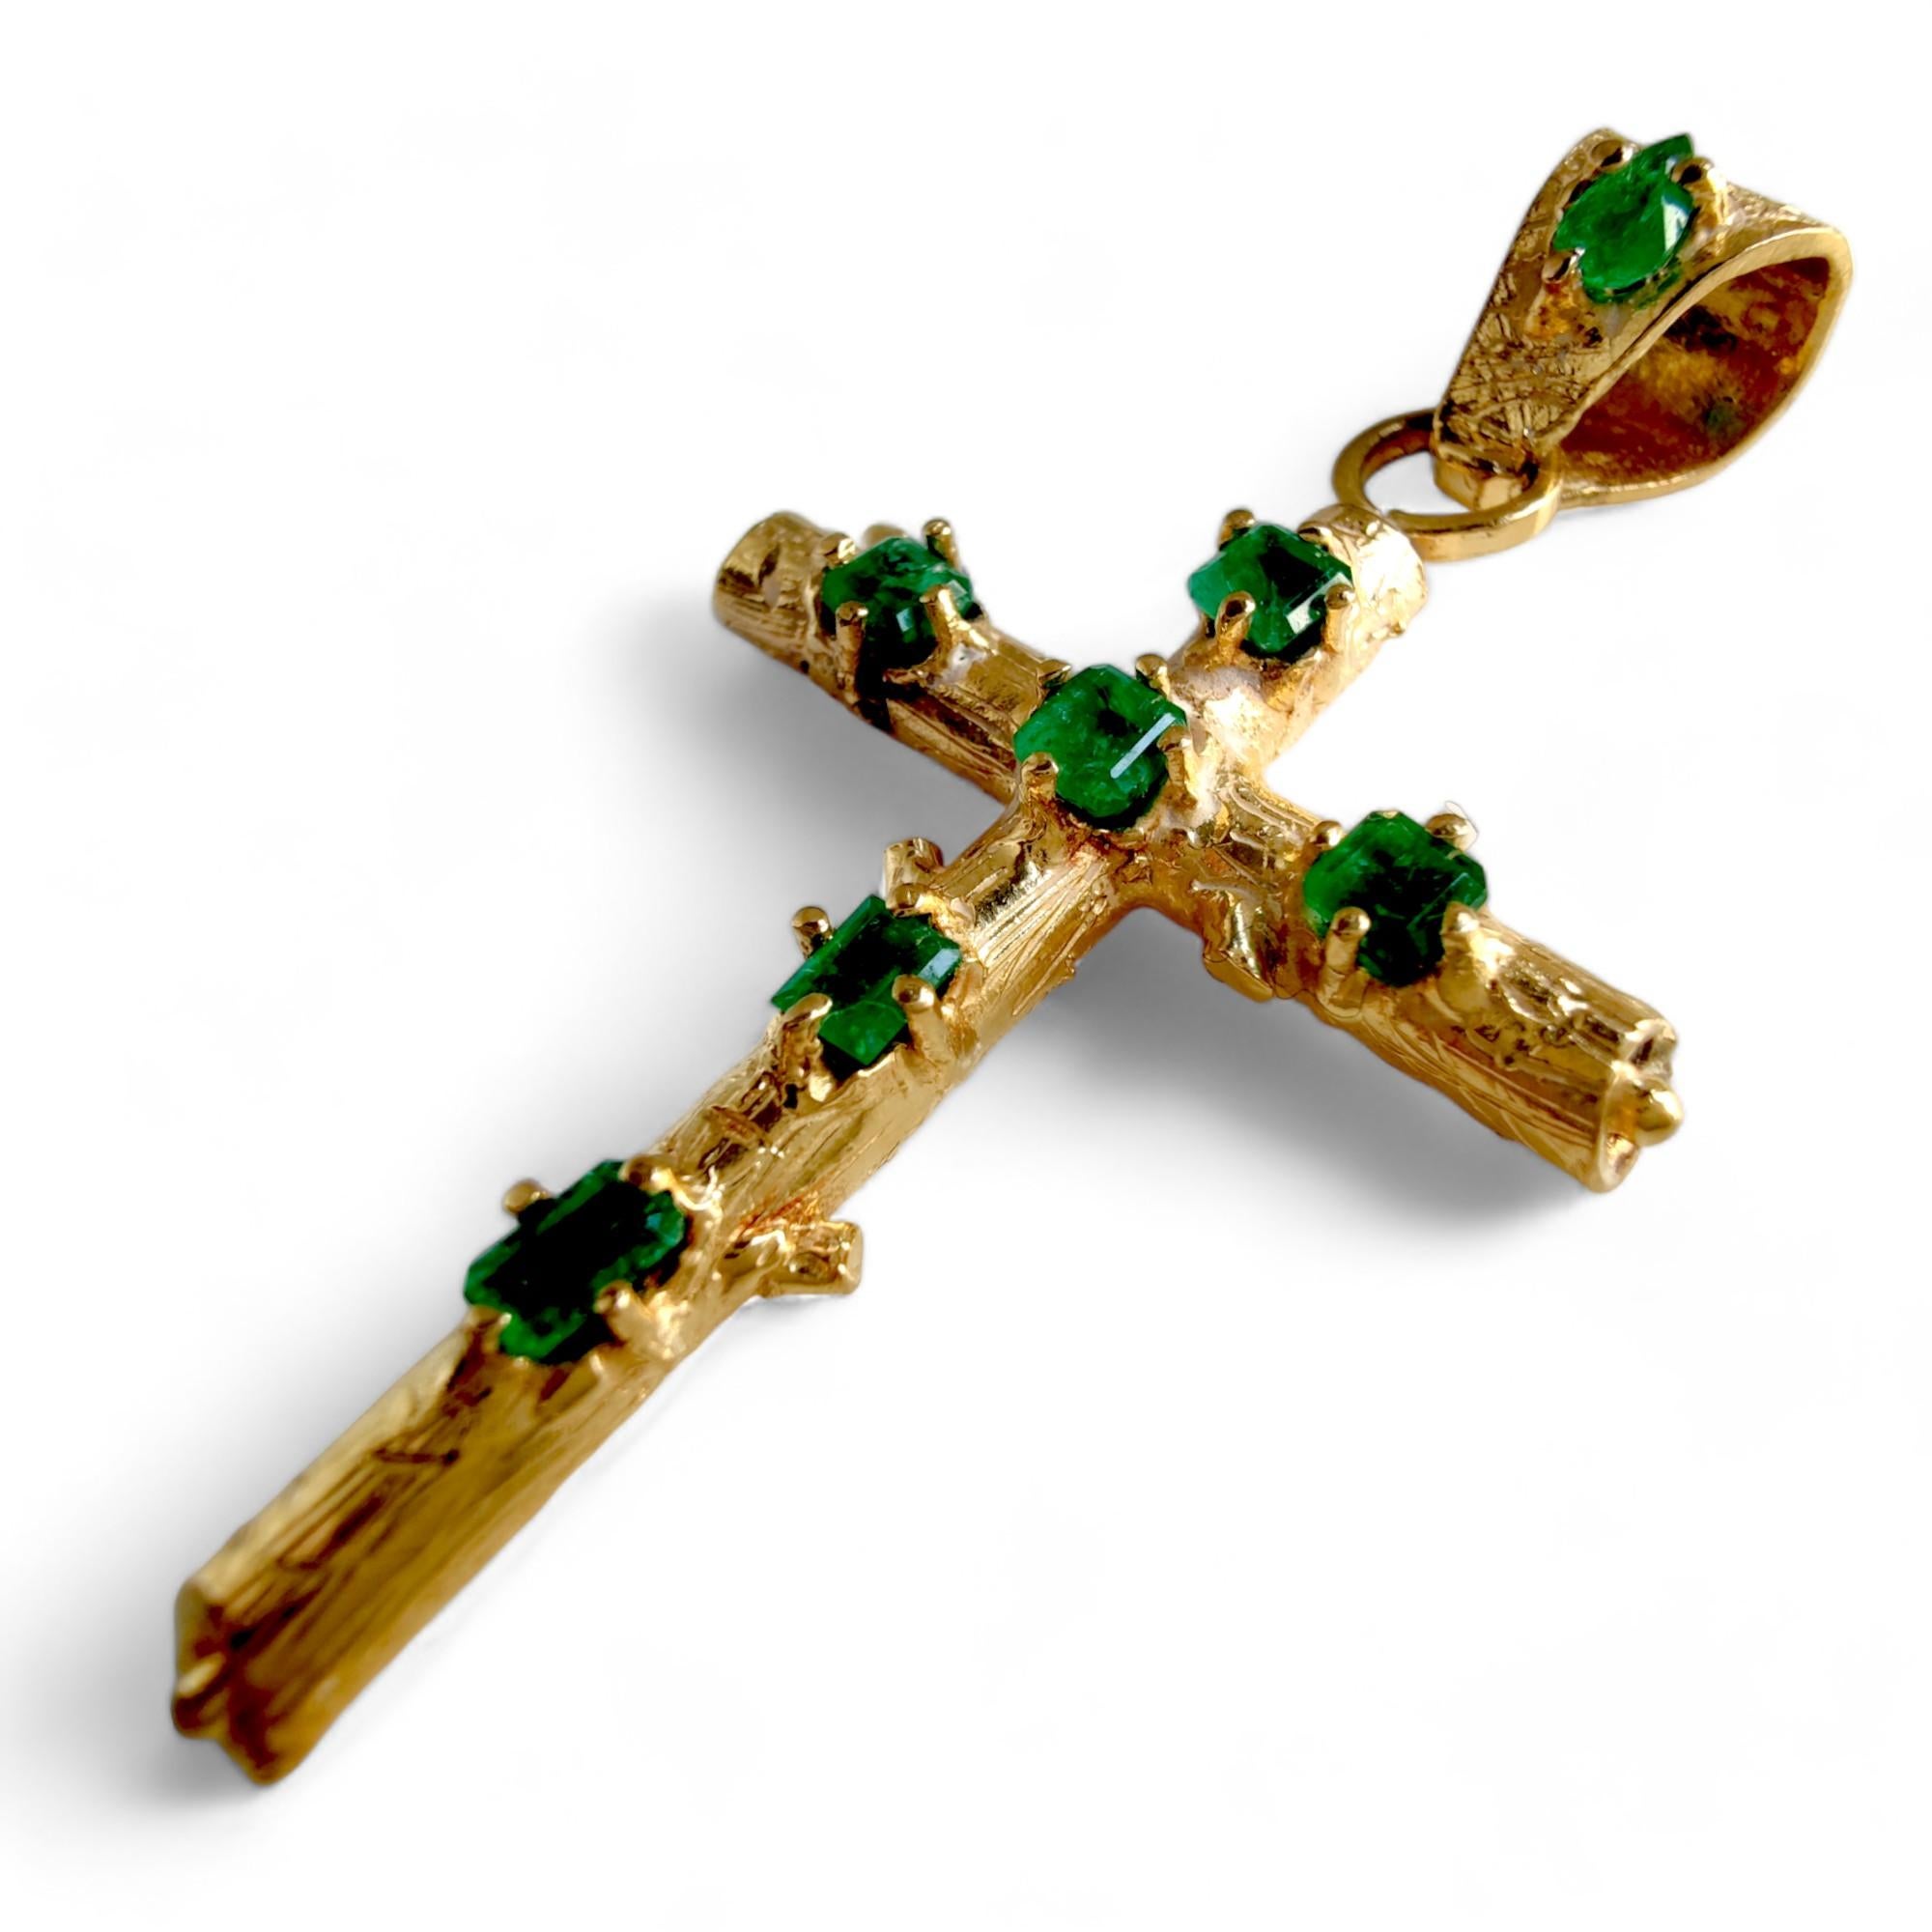 Emerald Cut 18K Yellow Gold Handmade Cross Pendant with  2.04 ct Emeralds - Unique Jewel For Sale